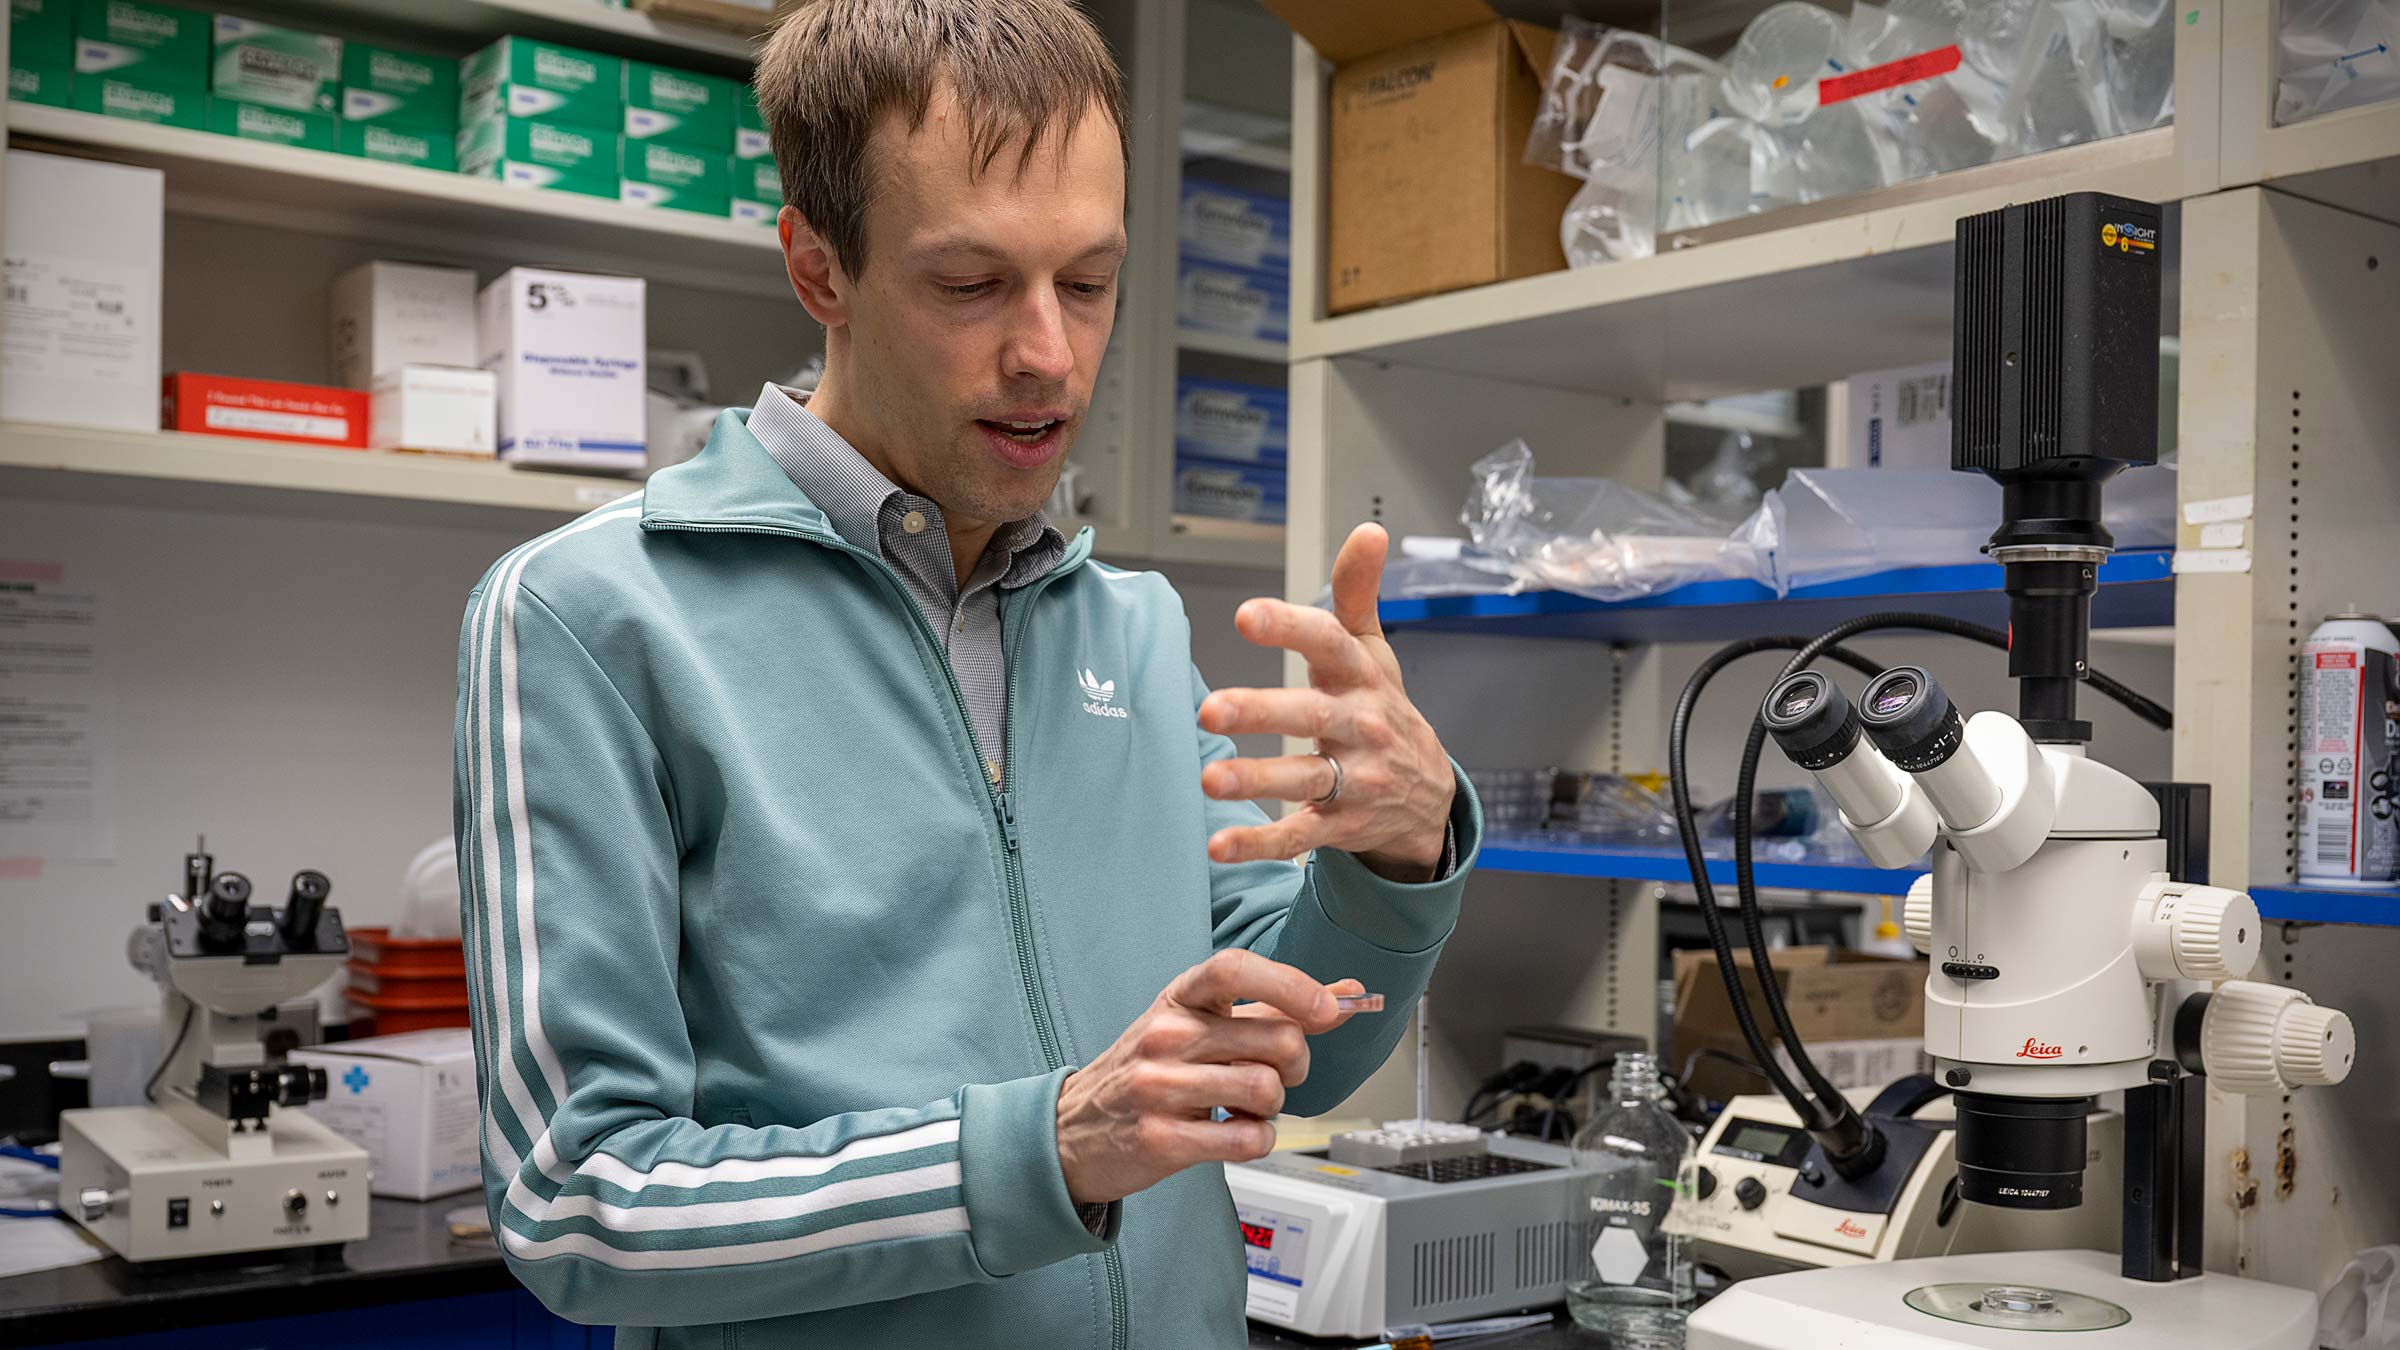 Ohio State researcher shares his research using zebrafish